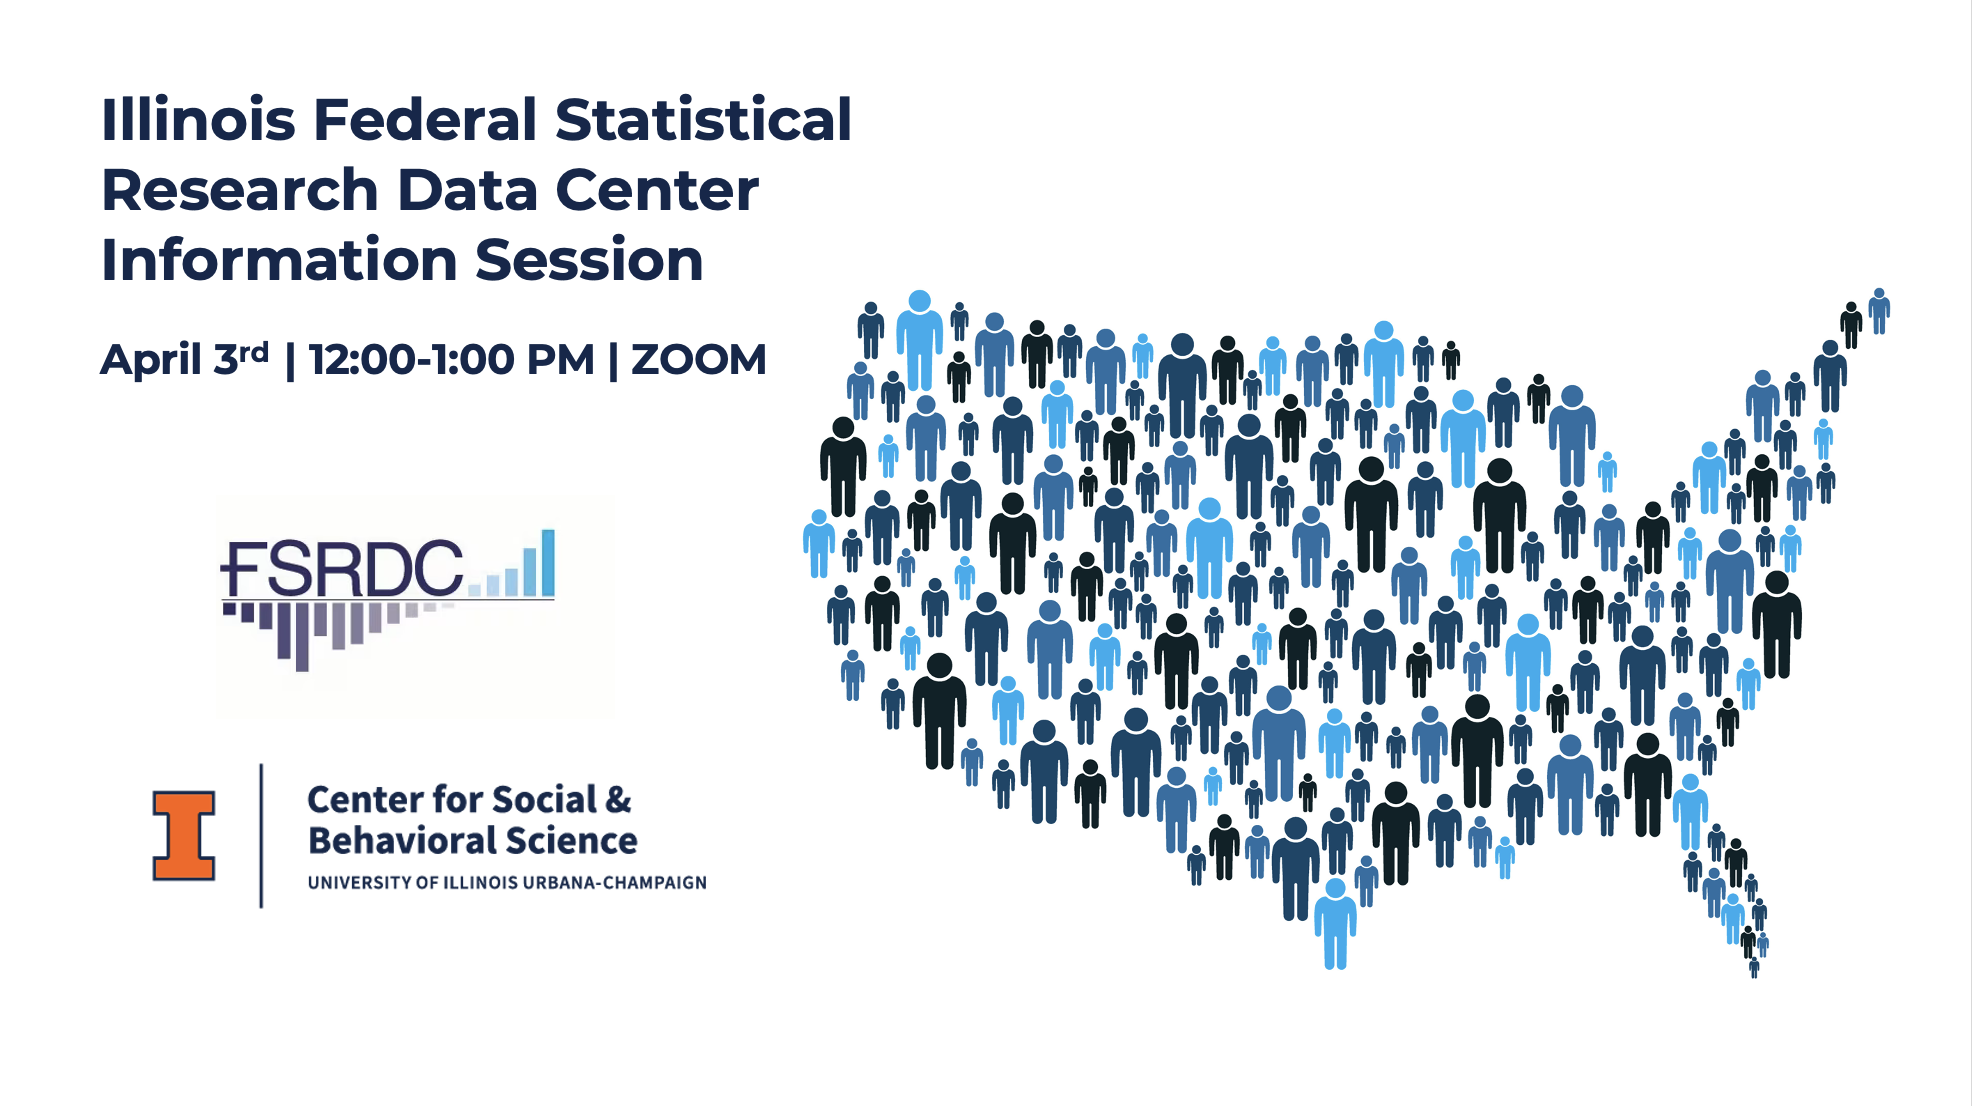 An image of the US made up by different colored images of men and women in blue, with the logo for both agencies and the event information above.